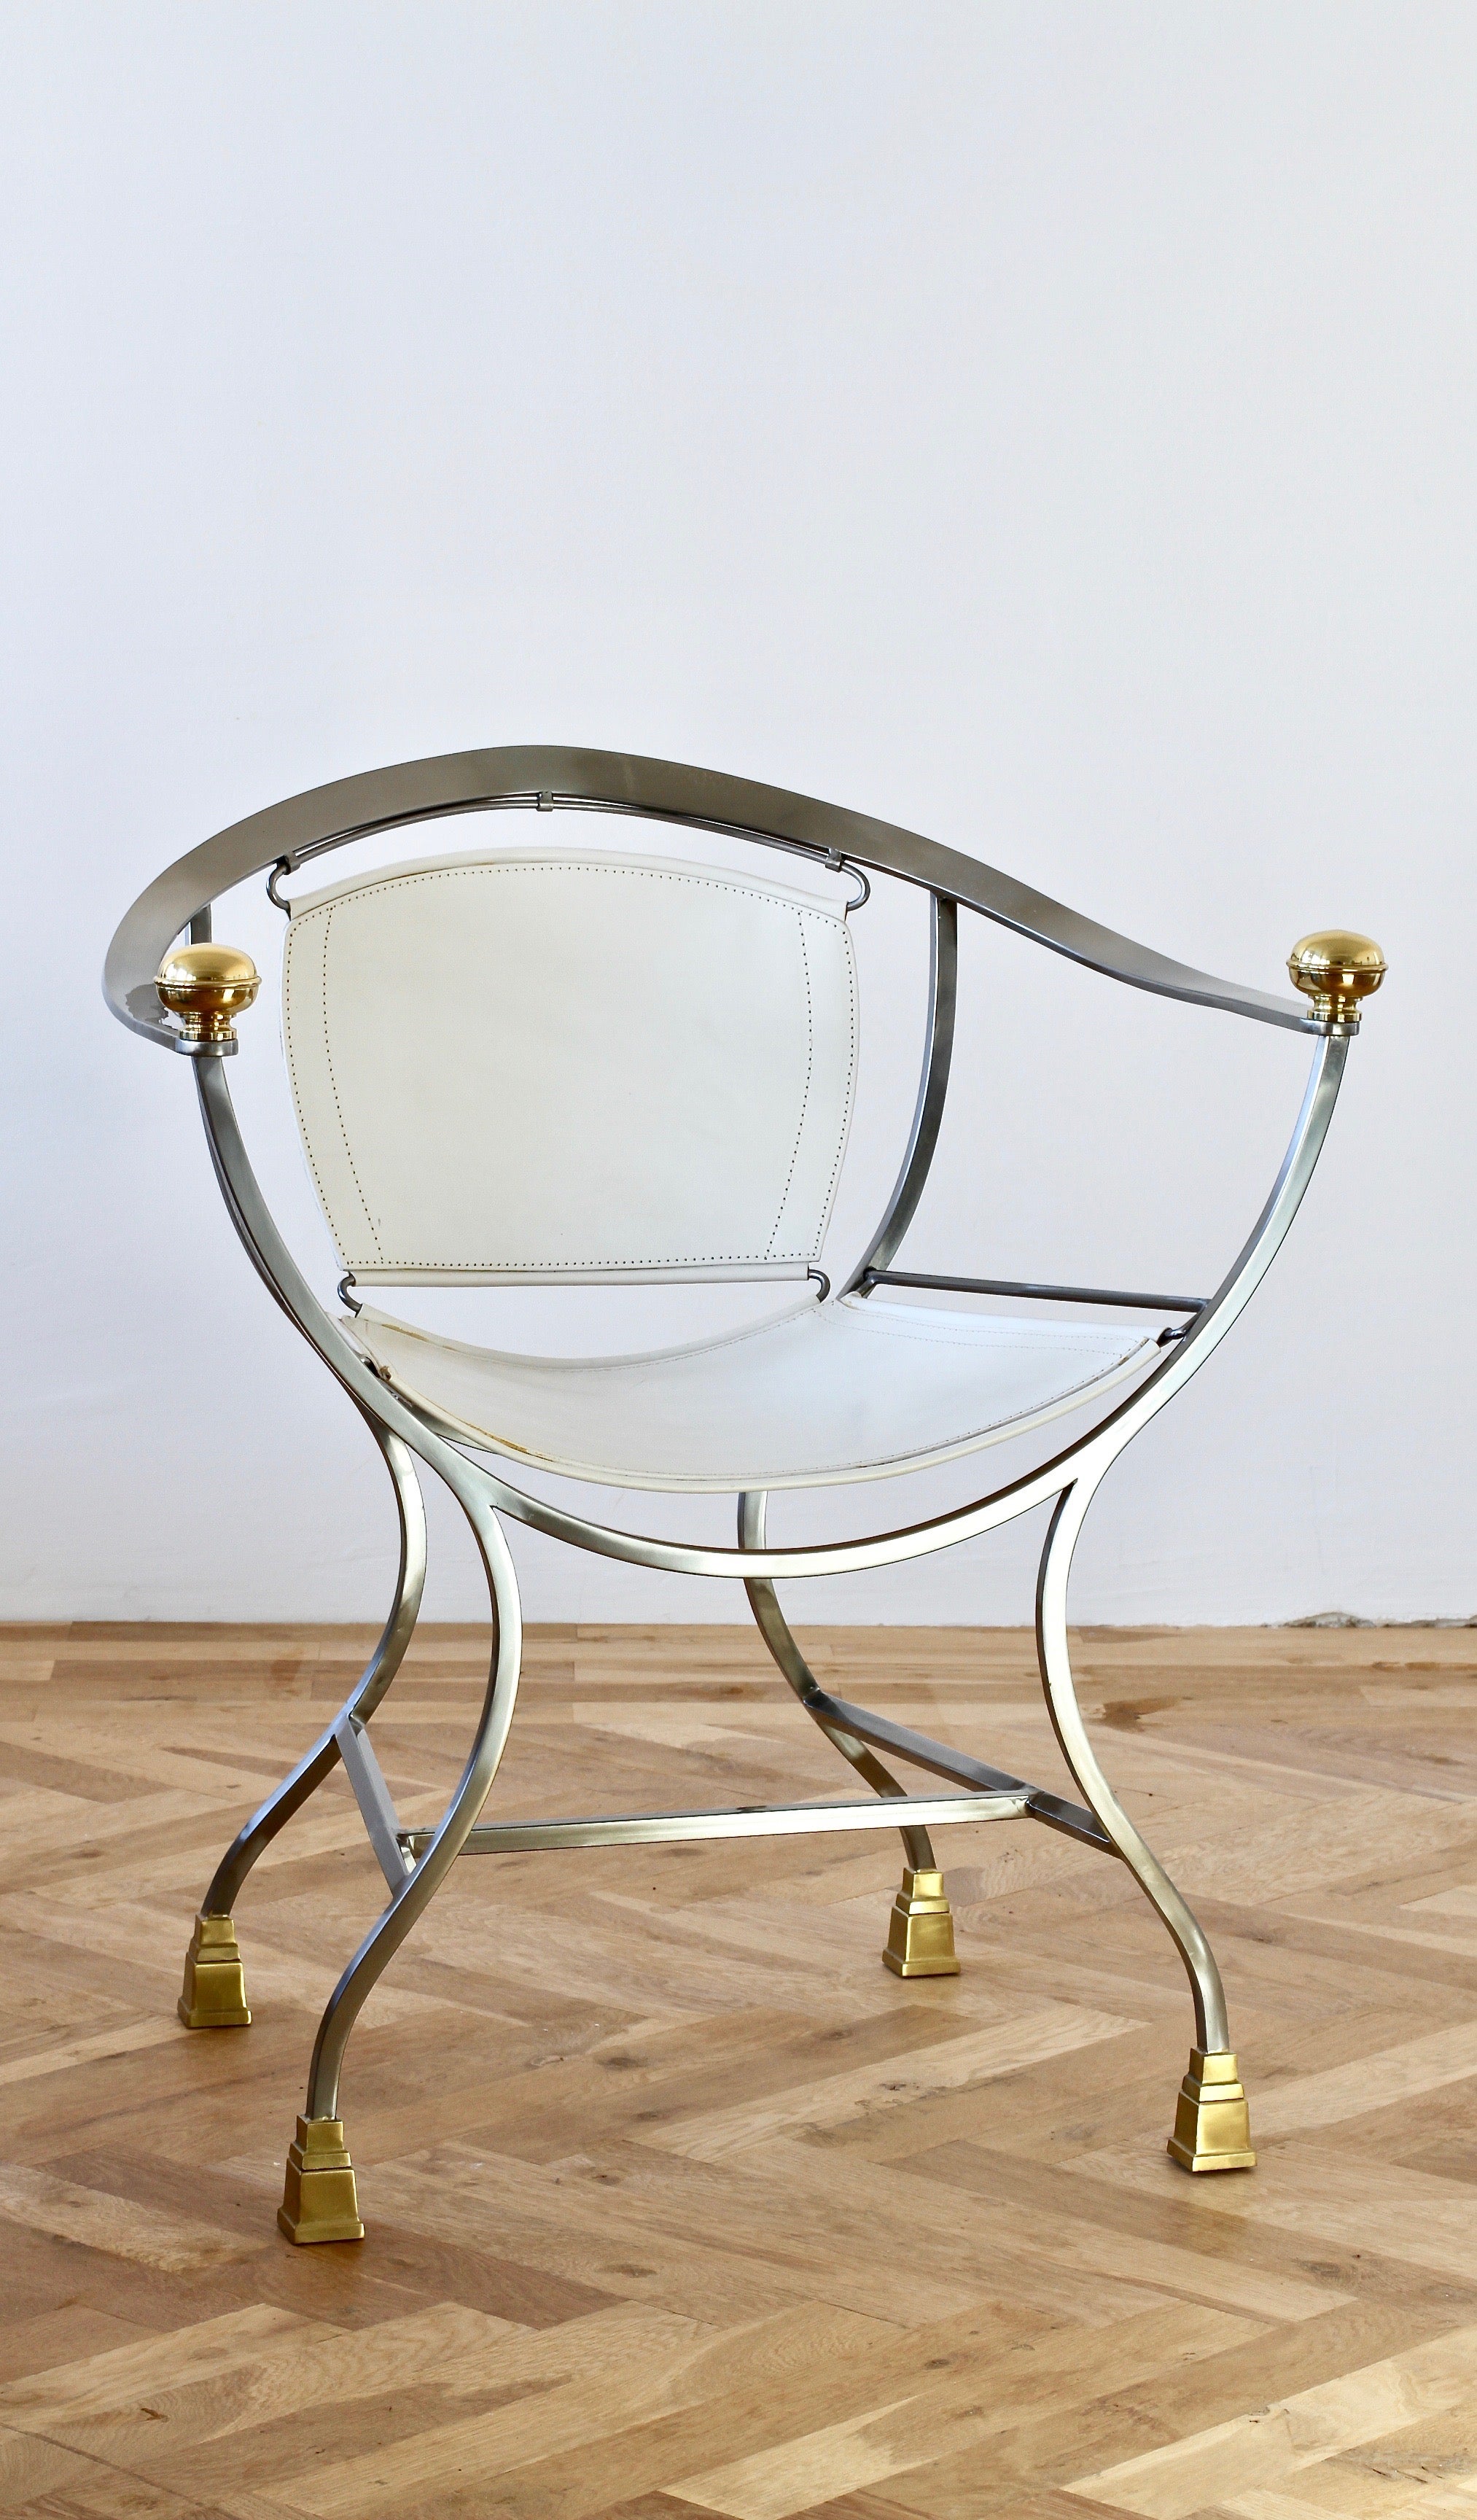 Single rare vintage 'Pompeii' armchair, dining seat or chair by Italian designer Alberto Orlandi, circa late 1970s-early 1980s. Made in Italy and featuring polished steel, solid cast brass feet and armrest details with white leather seat and